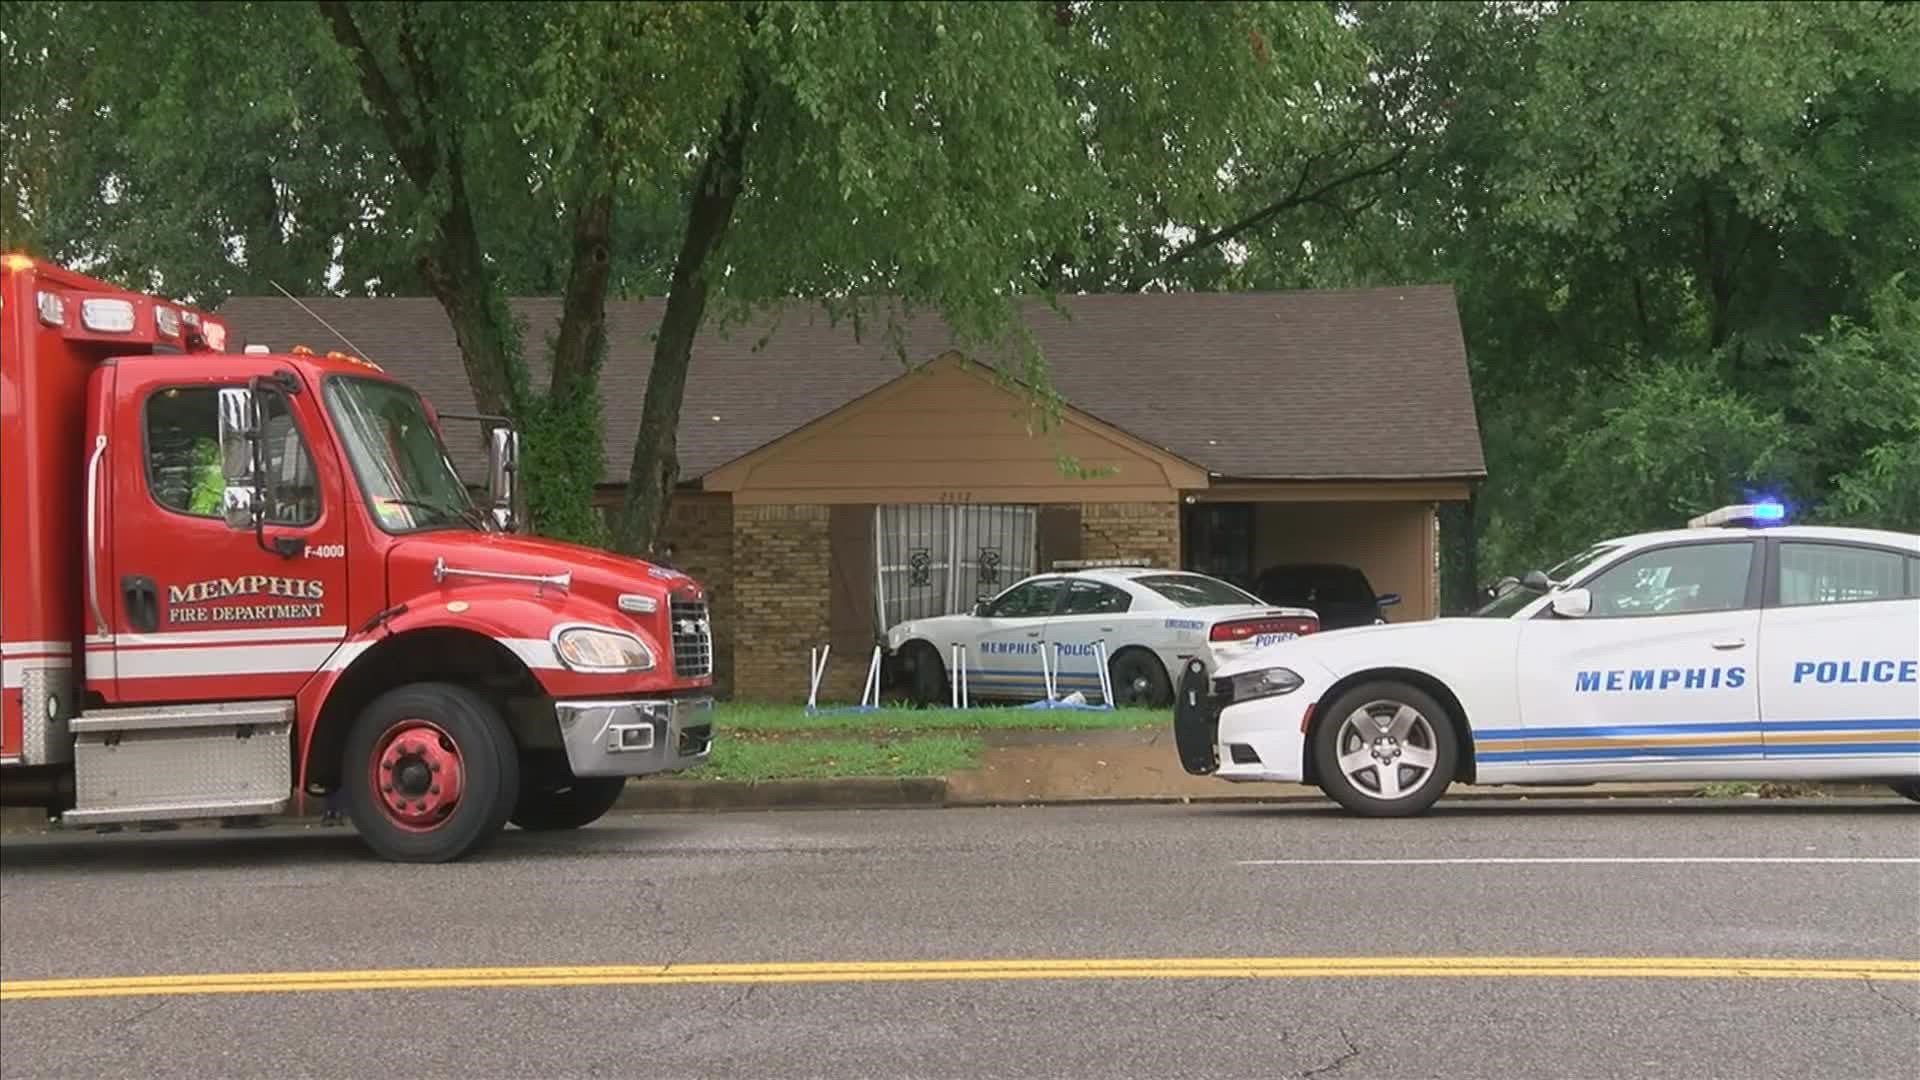 ABC24 crews were on the scene Wednesday afternoon after the Memphis Police cruiser crashed into the home on Clifton Ave. across from Grandview Heights Middle School.